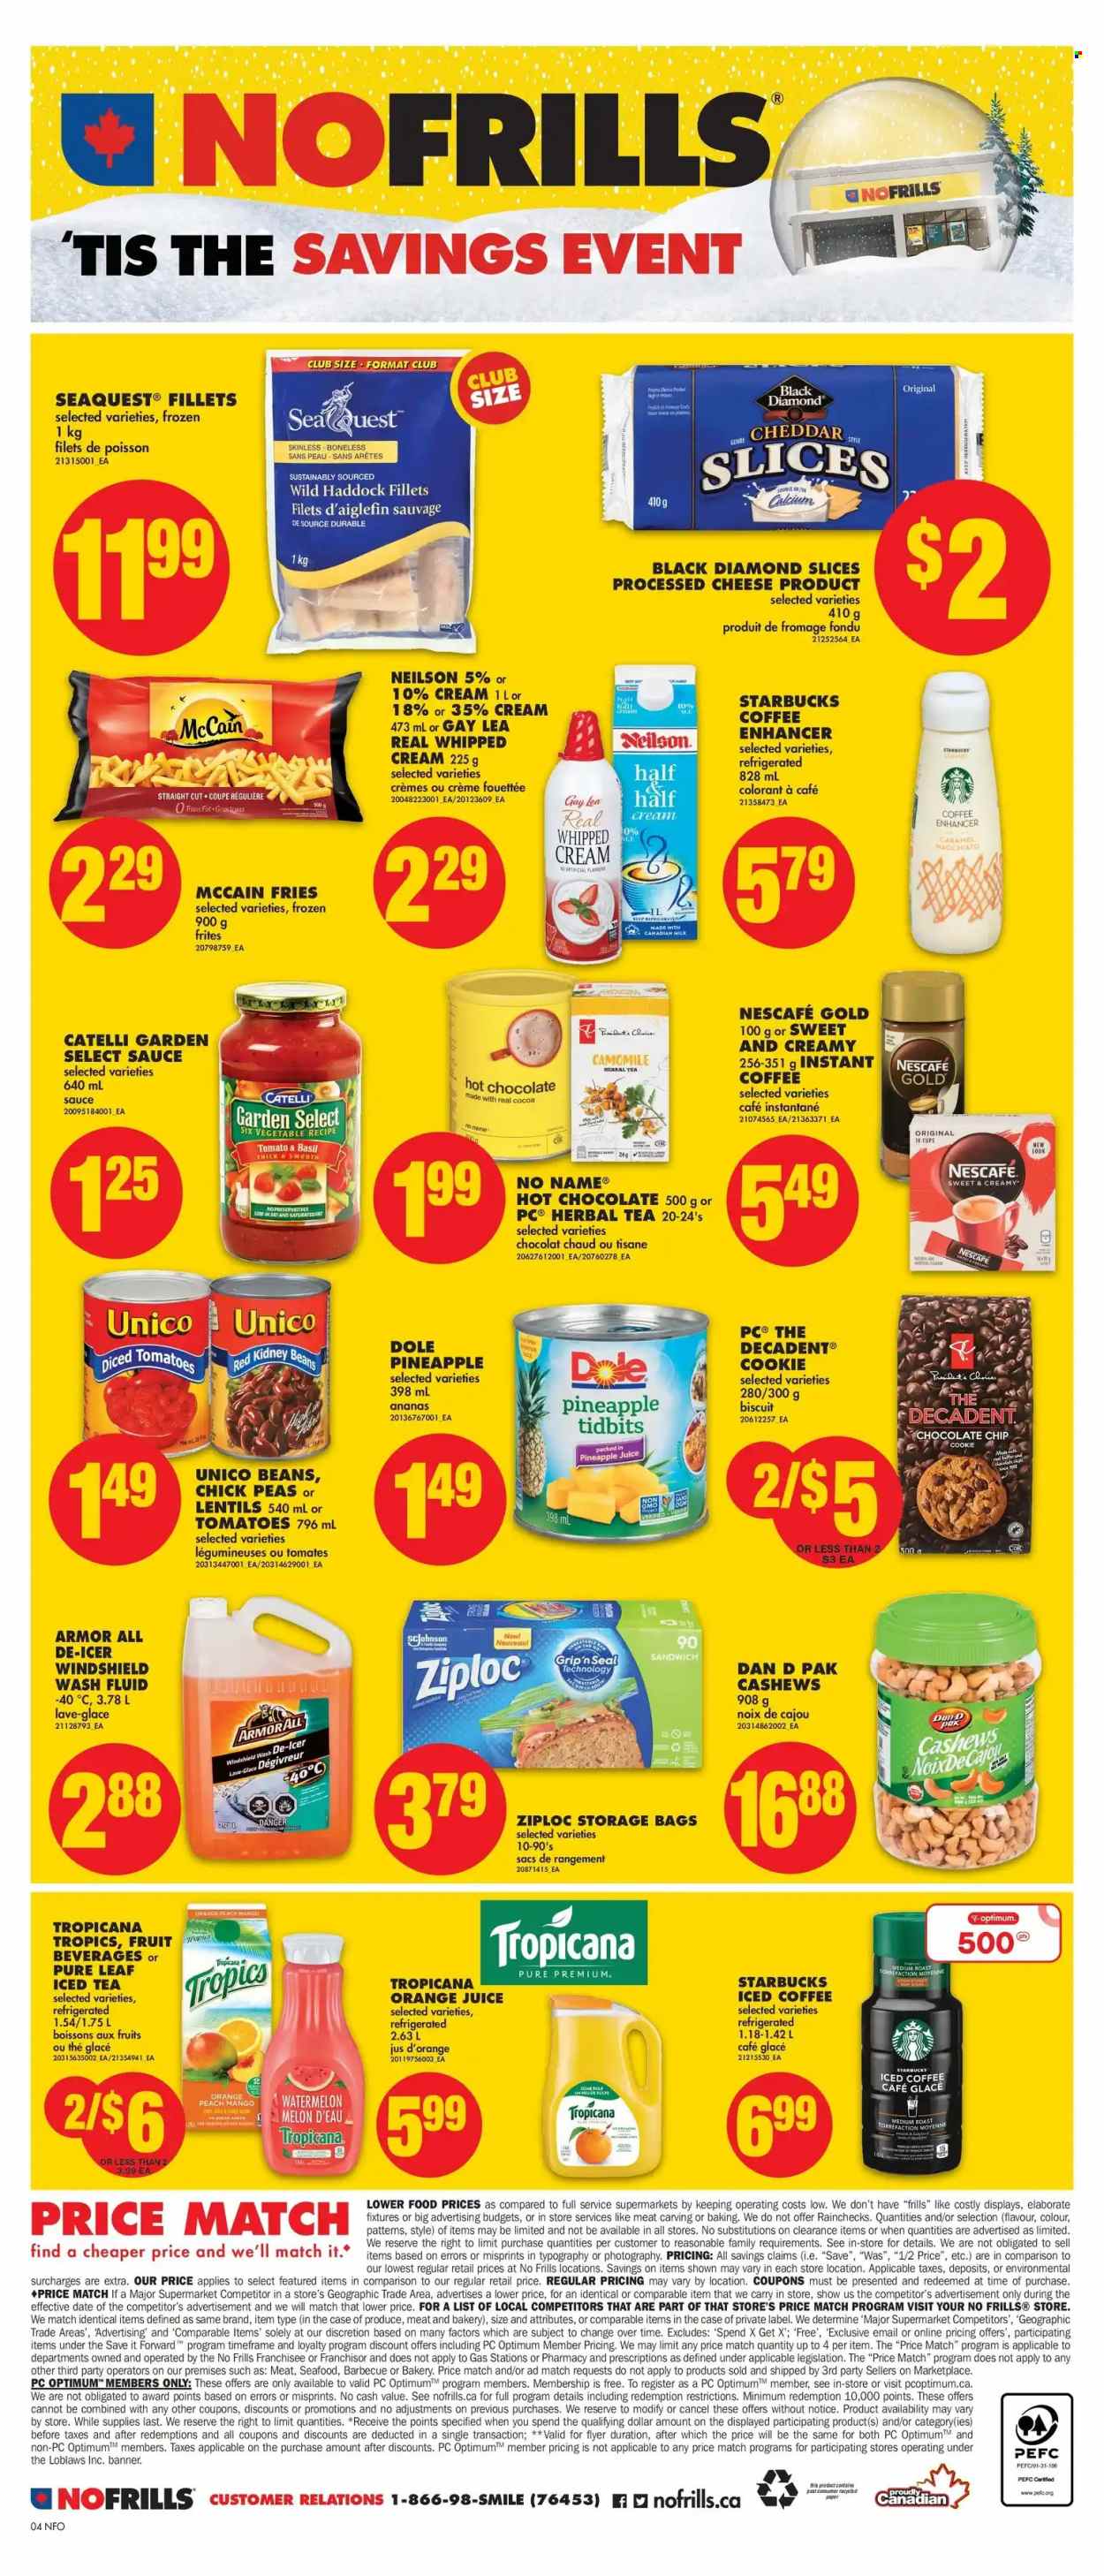 thumbnail - No Frills Flyer - December 01, 2022 - December 07, 2022 - Sales products - tomatoes, Dole, watermelon, pineapple, melons, haddock, seafood, No Name, sandwich, sauce, cheddar, cheese, Président, milk, whipped cream, McCain, potato fries, biscuit, cocoa, lentils, kidney beans, diced tomatoes, cashews, pineapple juice, orange juice, juice, ice tea, iced coffee, hot chocolate, herbal tea, Pure Leaf, instant coffee, Starbucks, Half and half, bag, Ziploc, storage bag, cup, Optimum, Armor All, calcium, Nescafé. Page 4.